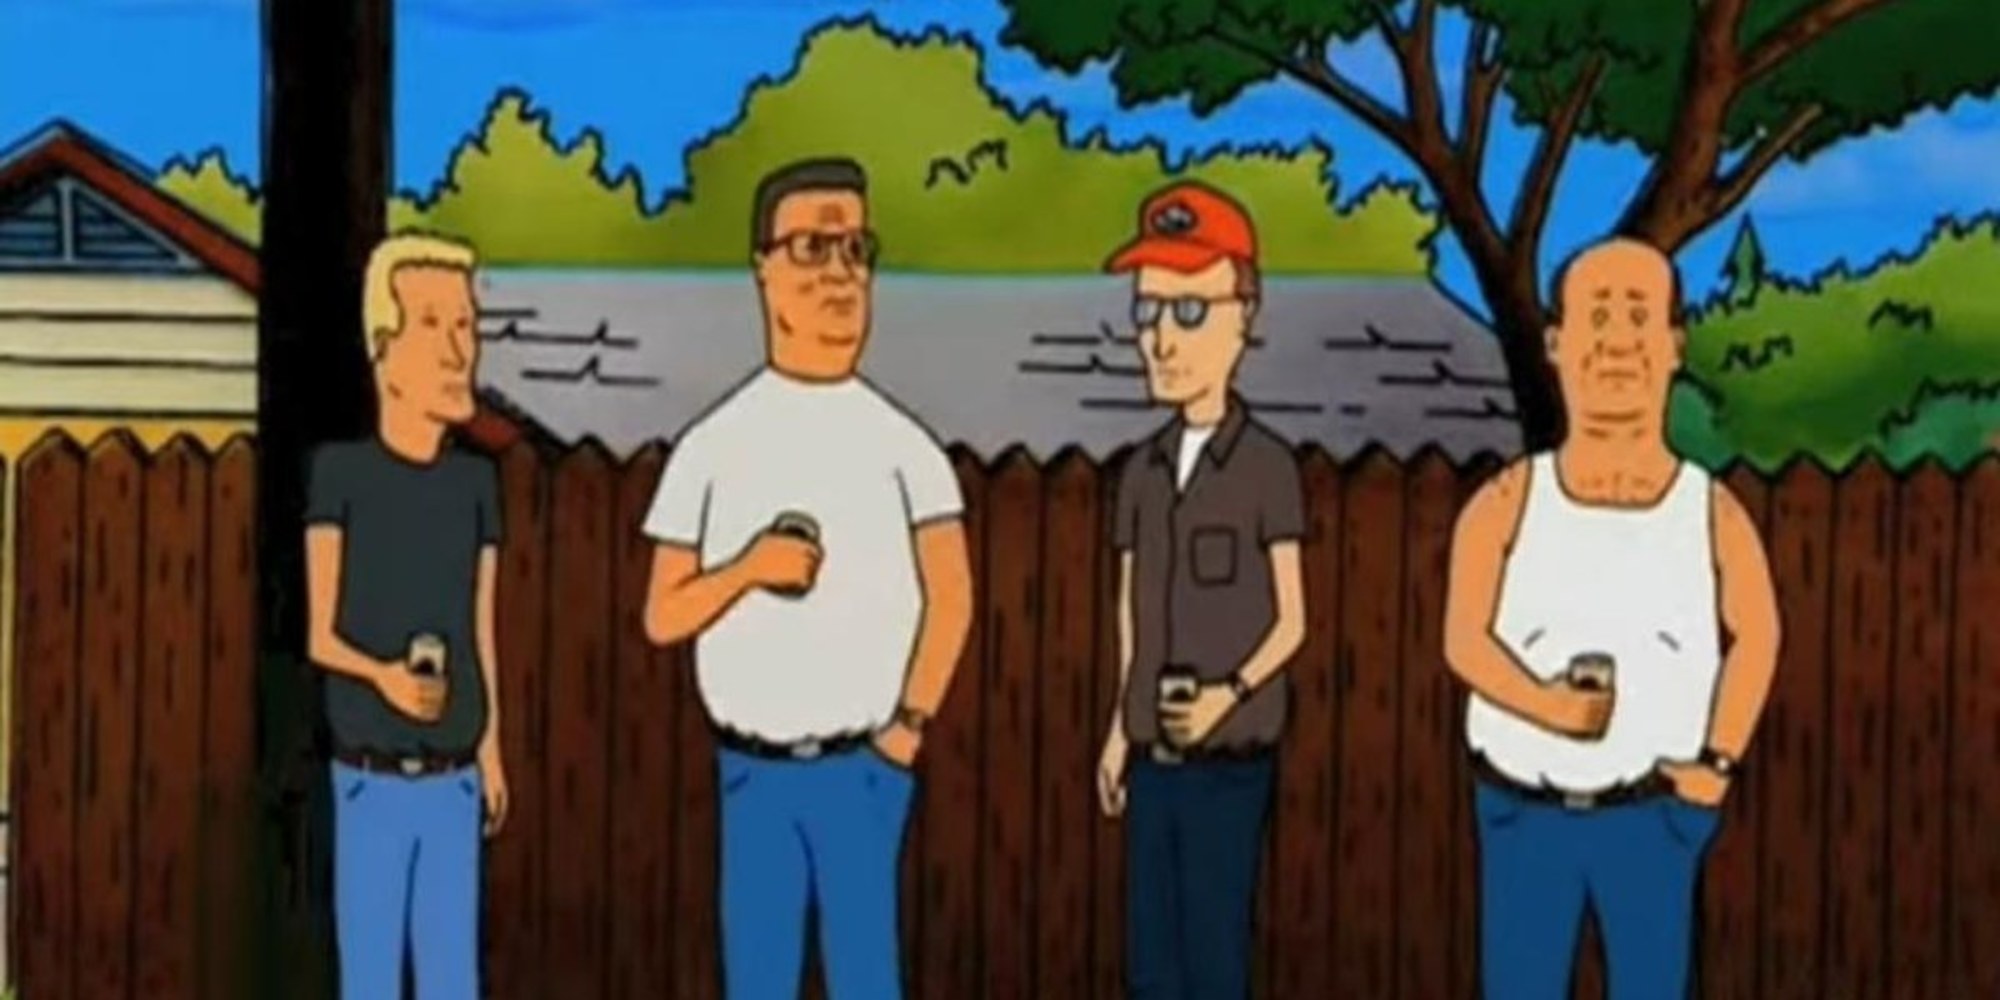 King Of The Hill Is 20 Years Old.